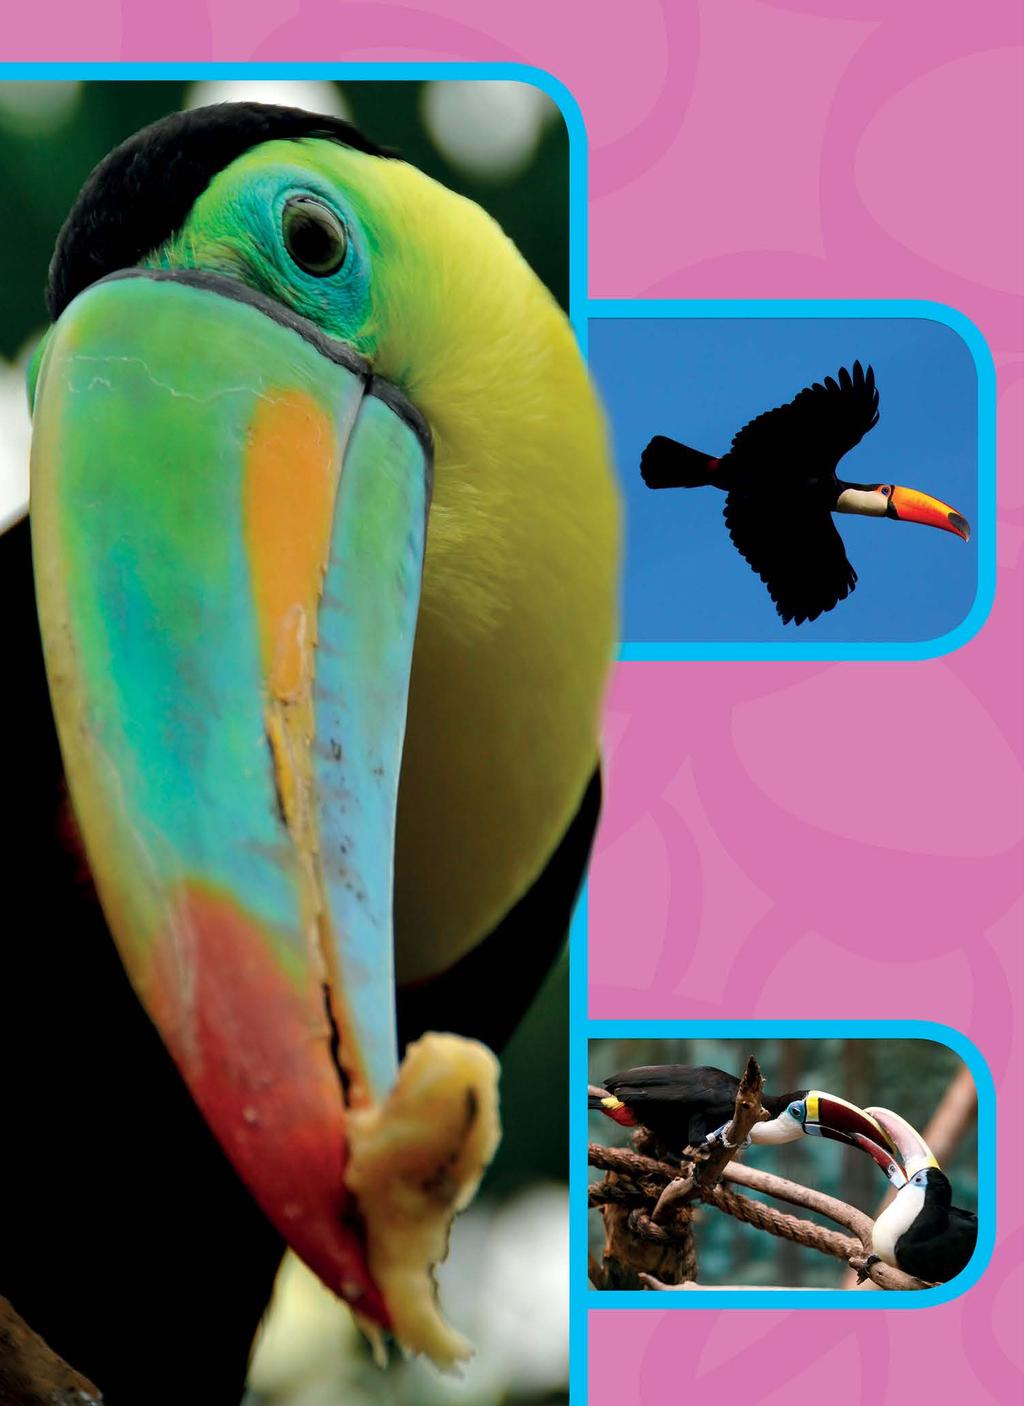 Toucans Their bills can be red, yellow, blue, white, green, brown, or black (or a combination of colors).